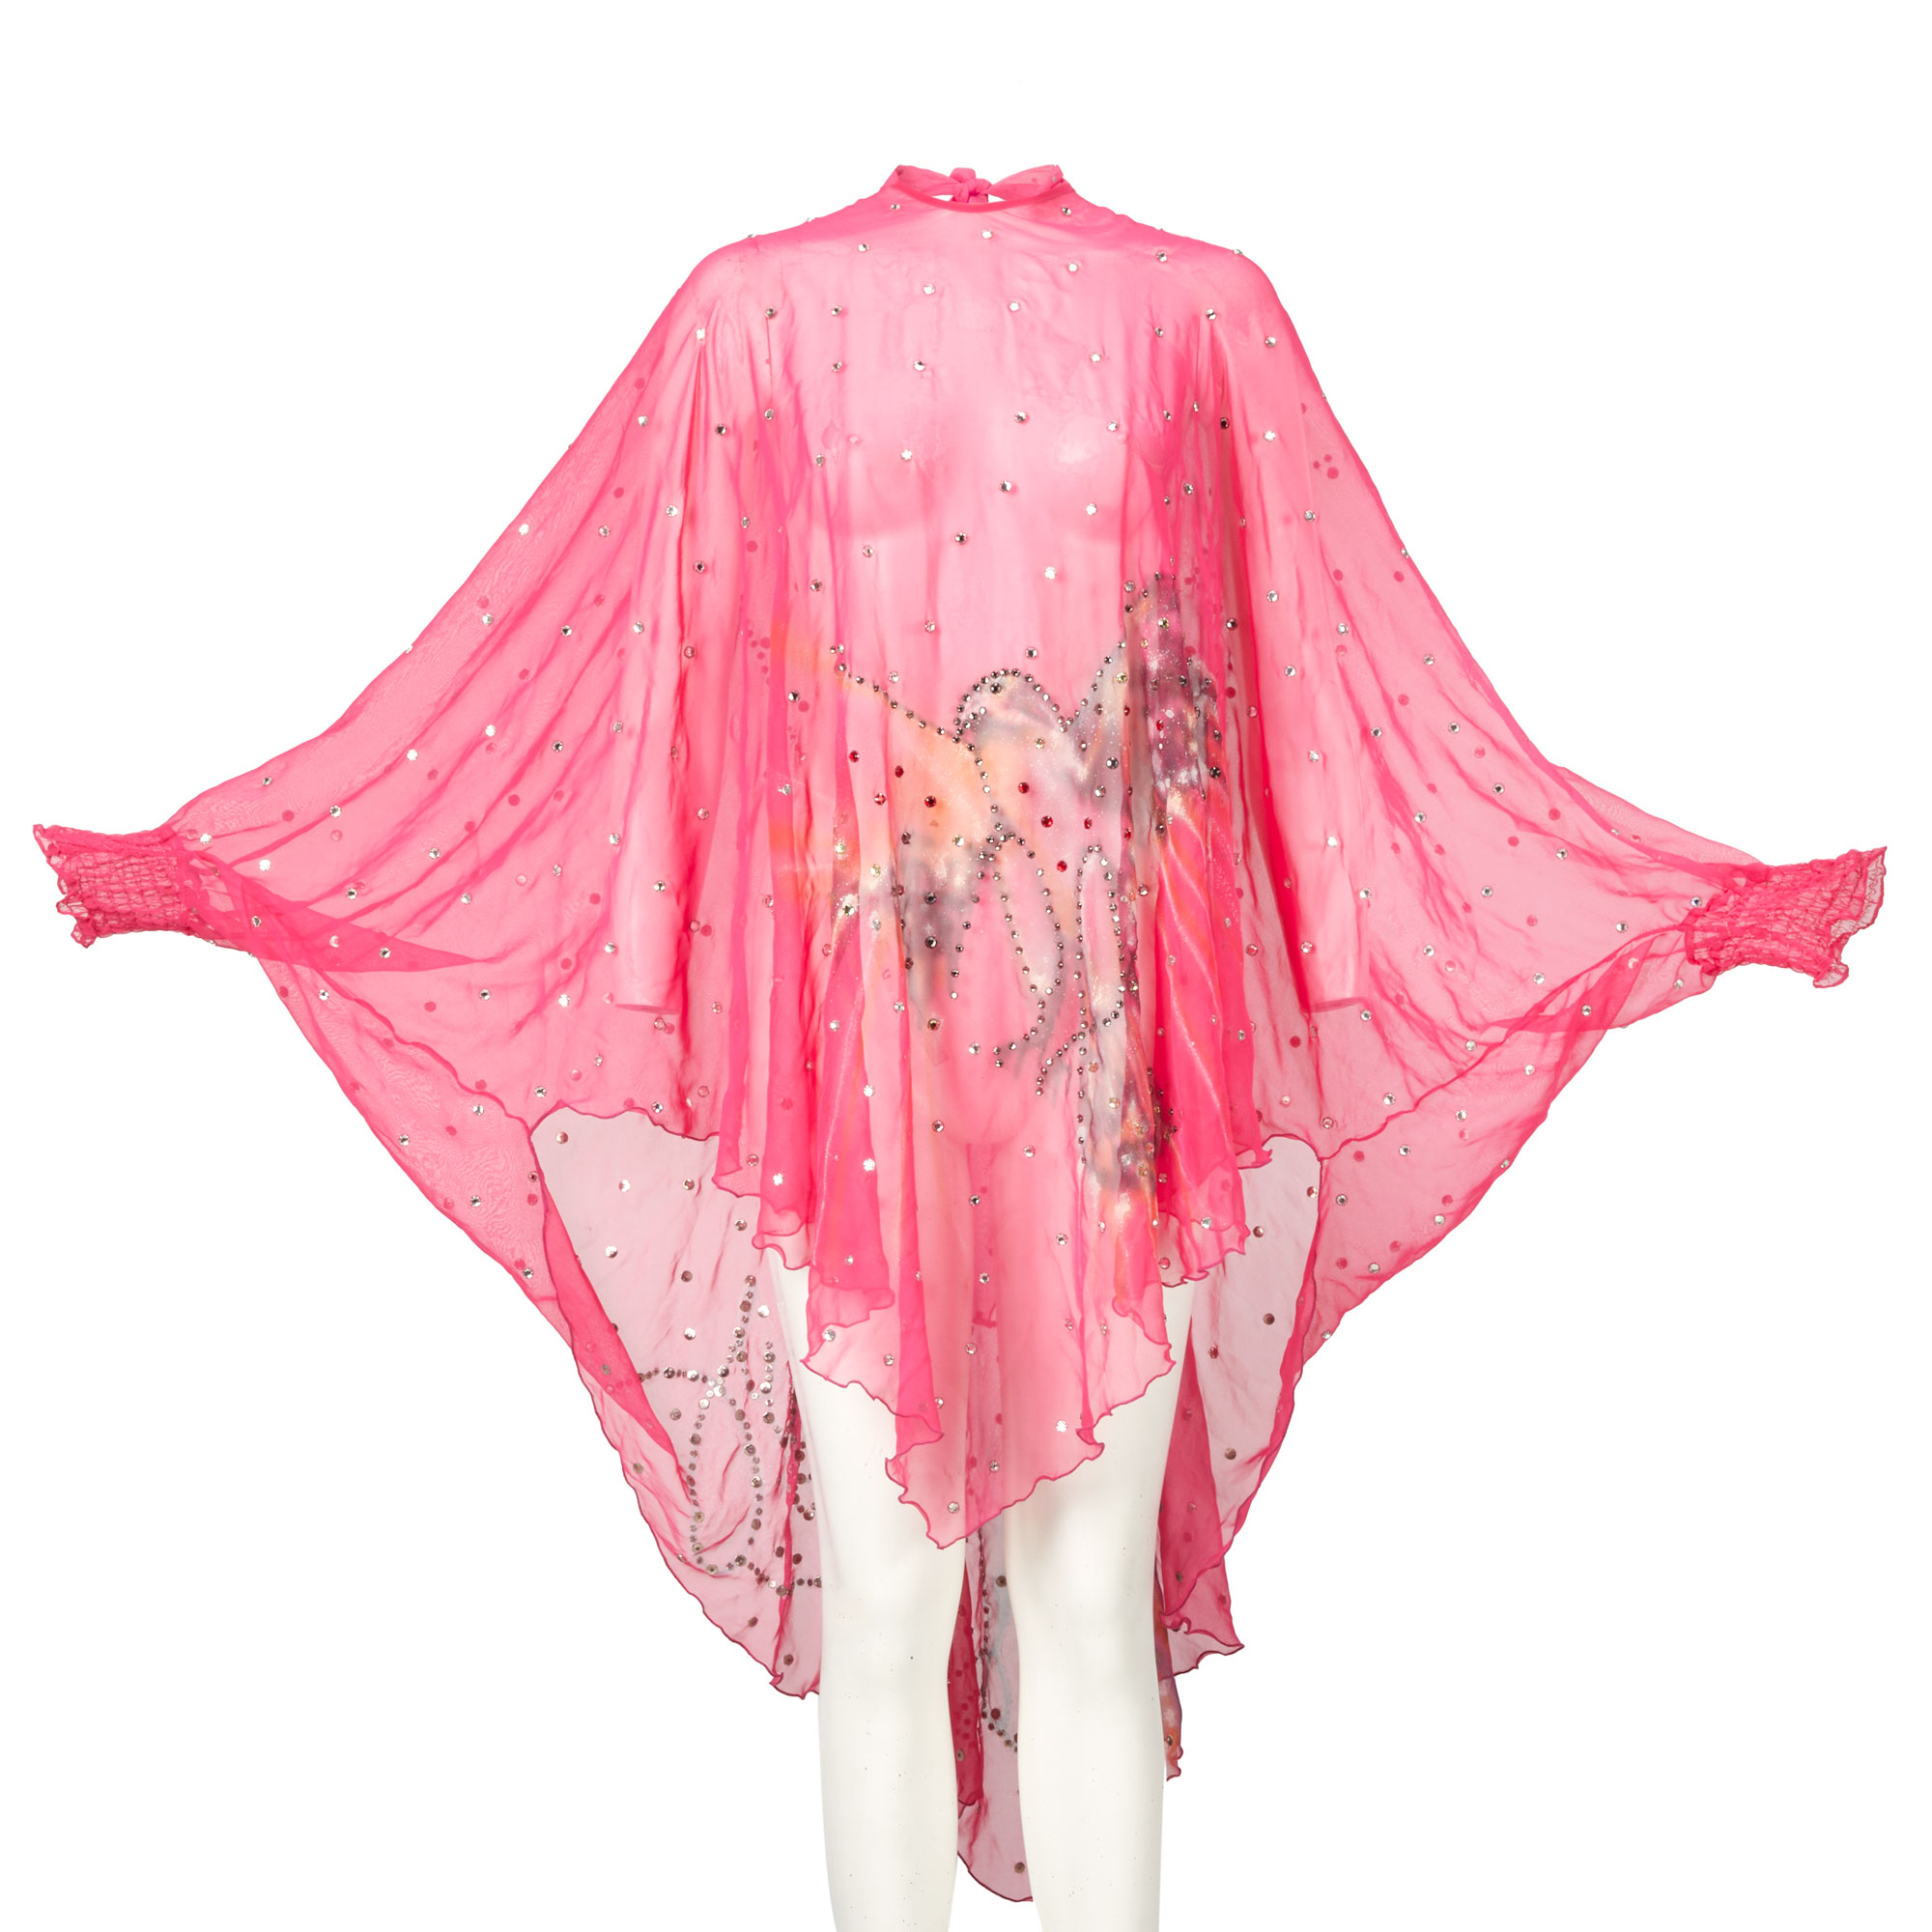 Cape worn by Dolly Parton